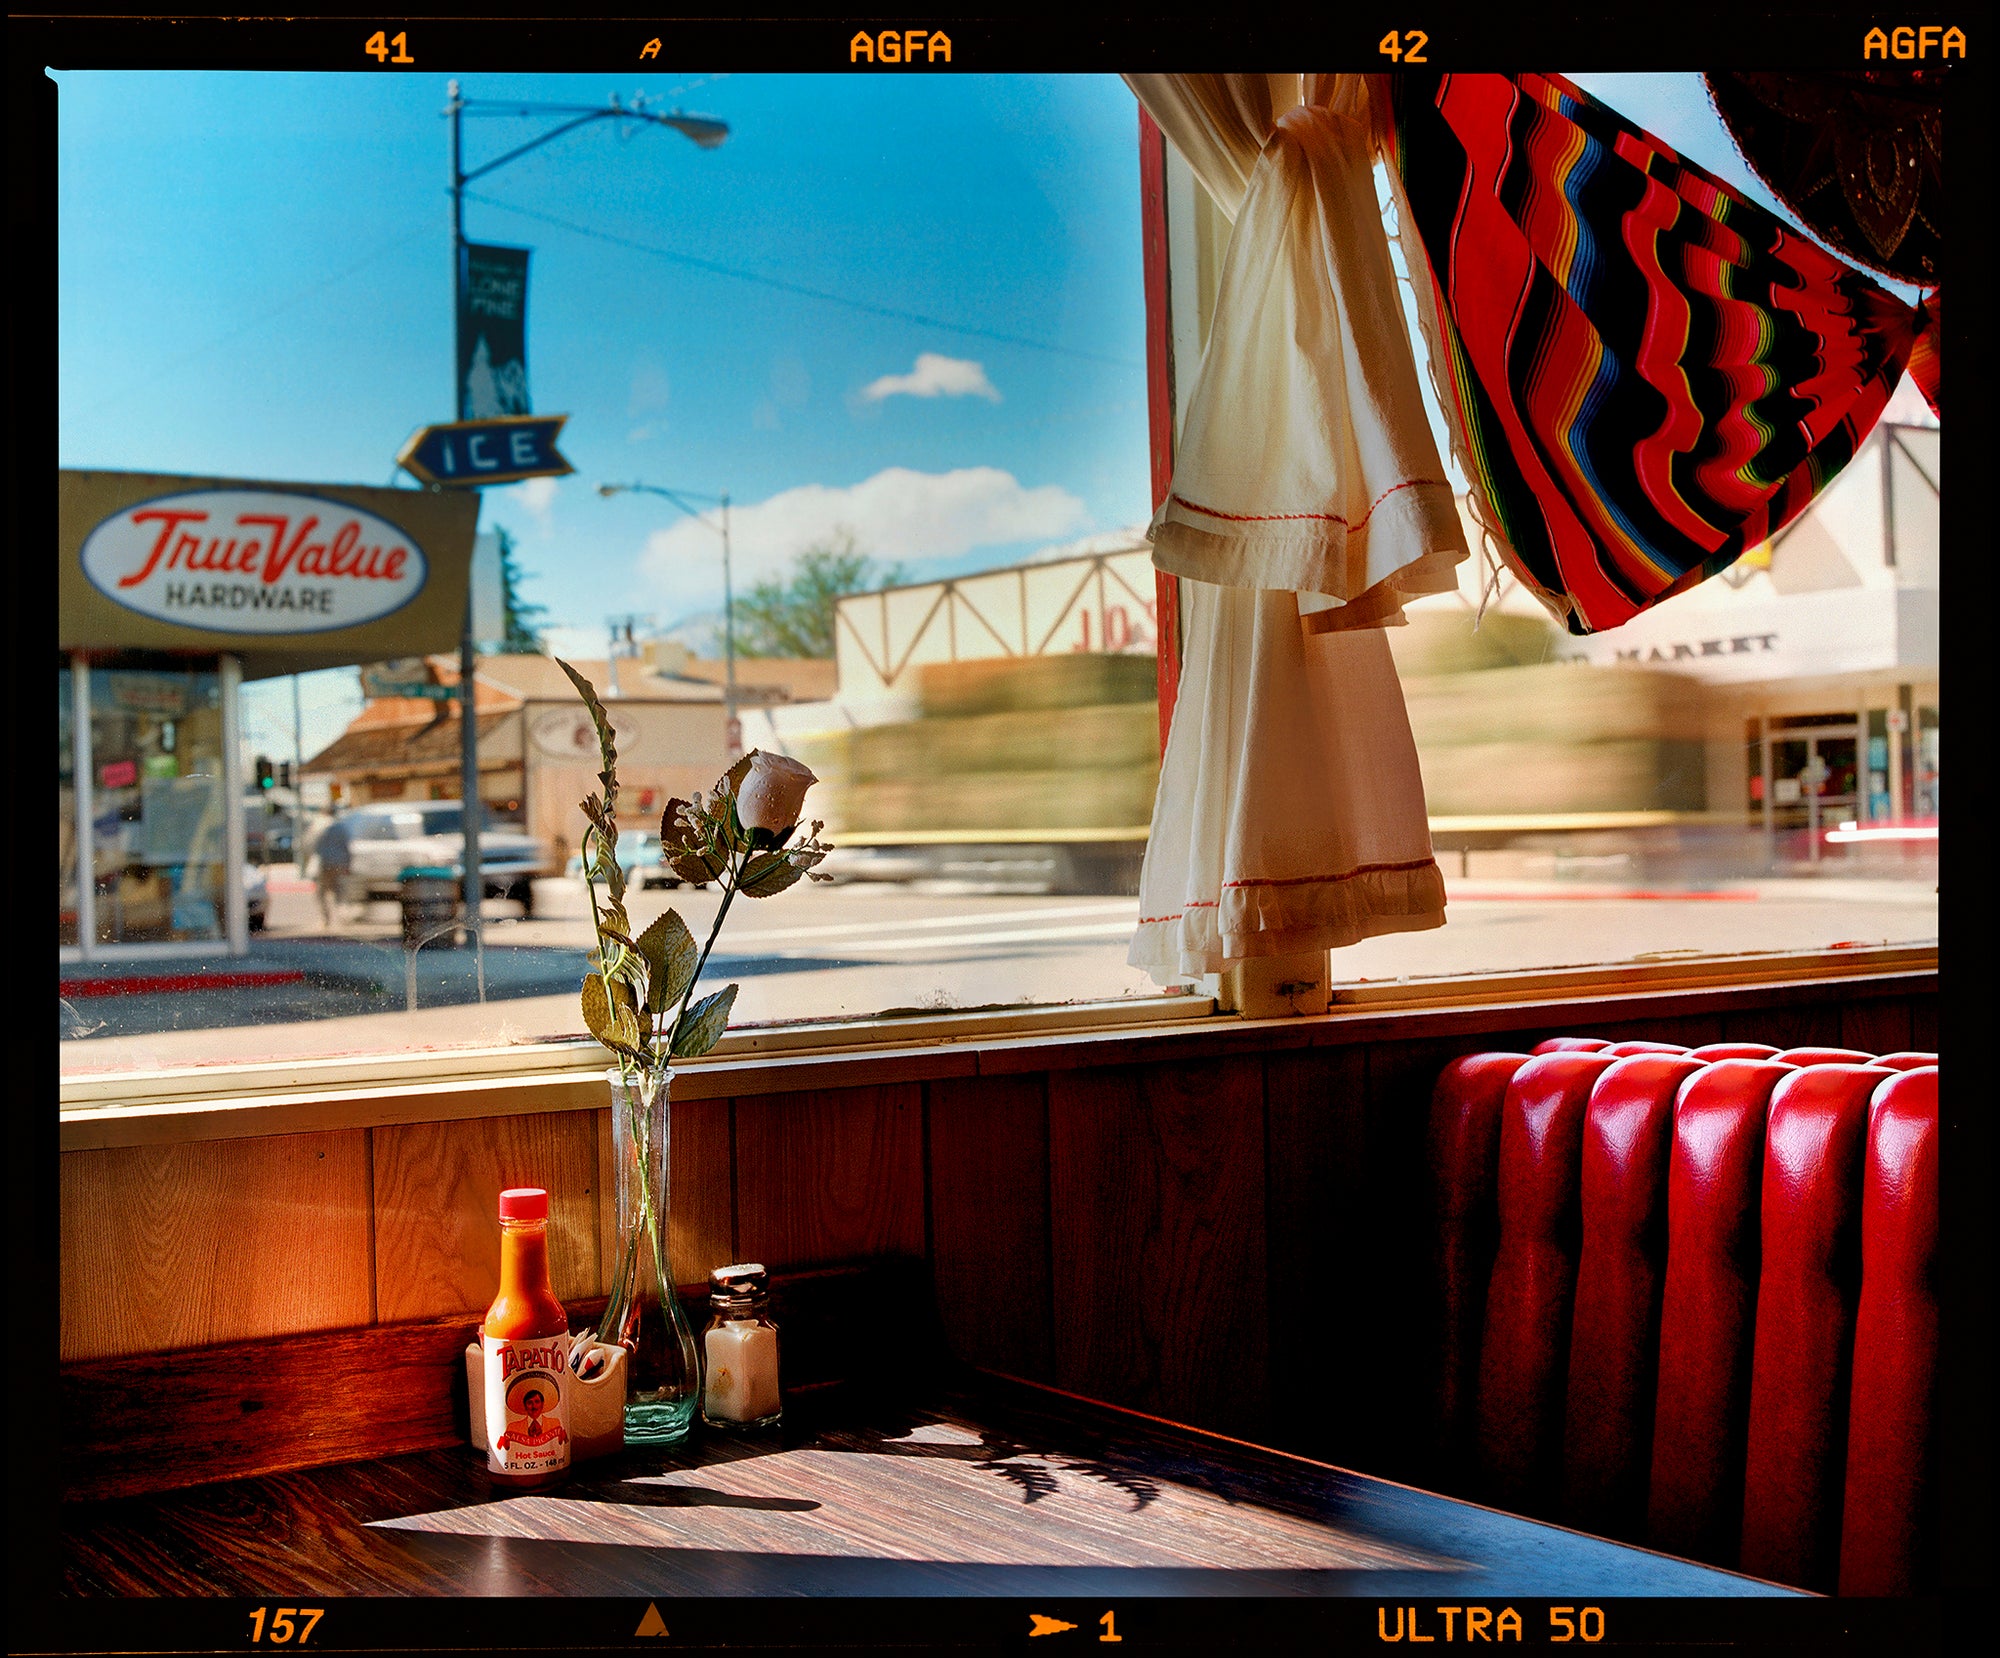 Photograph by Richard Heeps. Inside an American diner the light is shining on the table and the seat is the classic vibrant red faux-leather of a retro diner. The photograph is looking out of the window into the outside street.